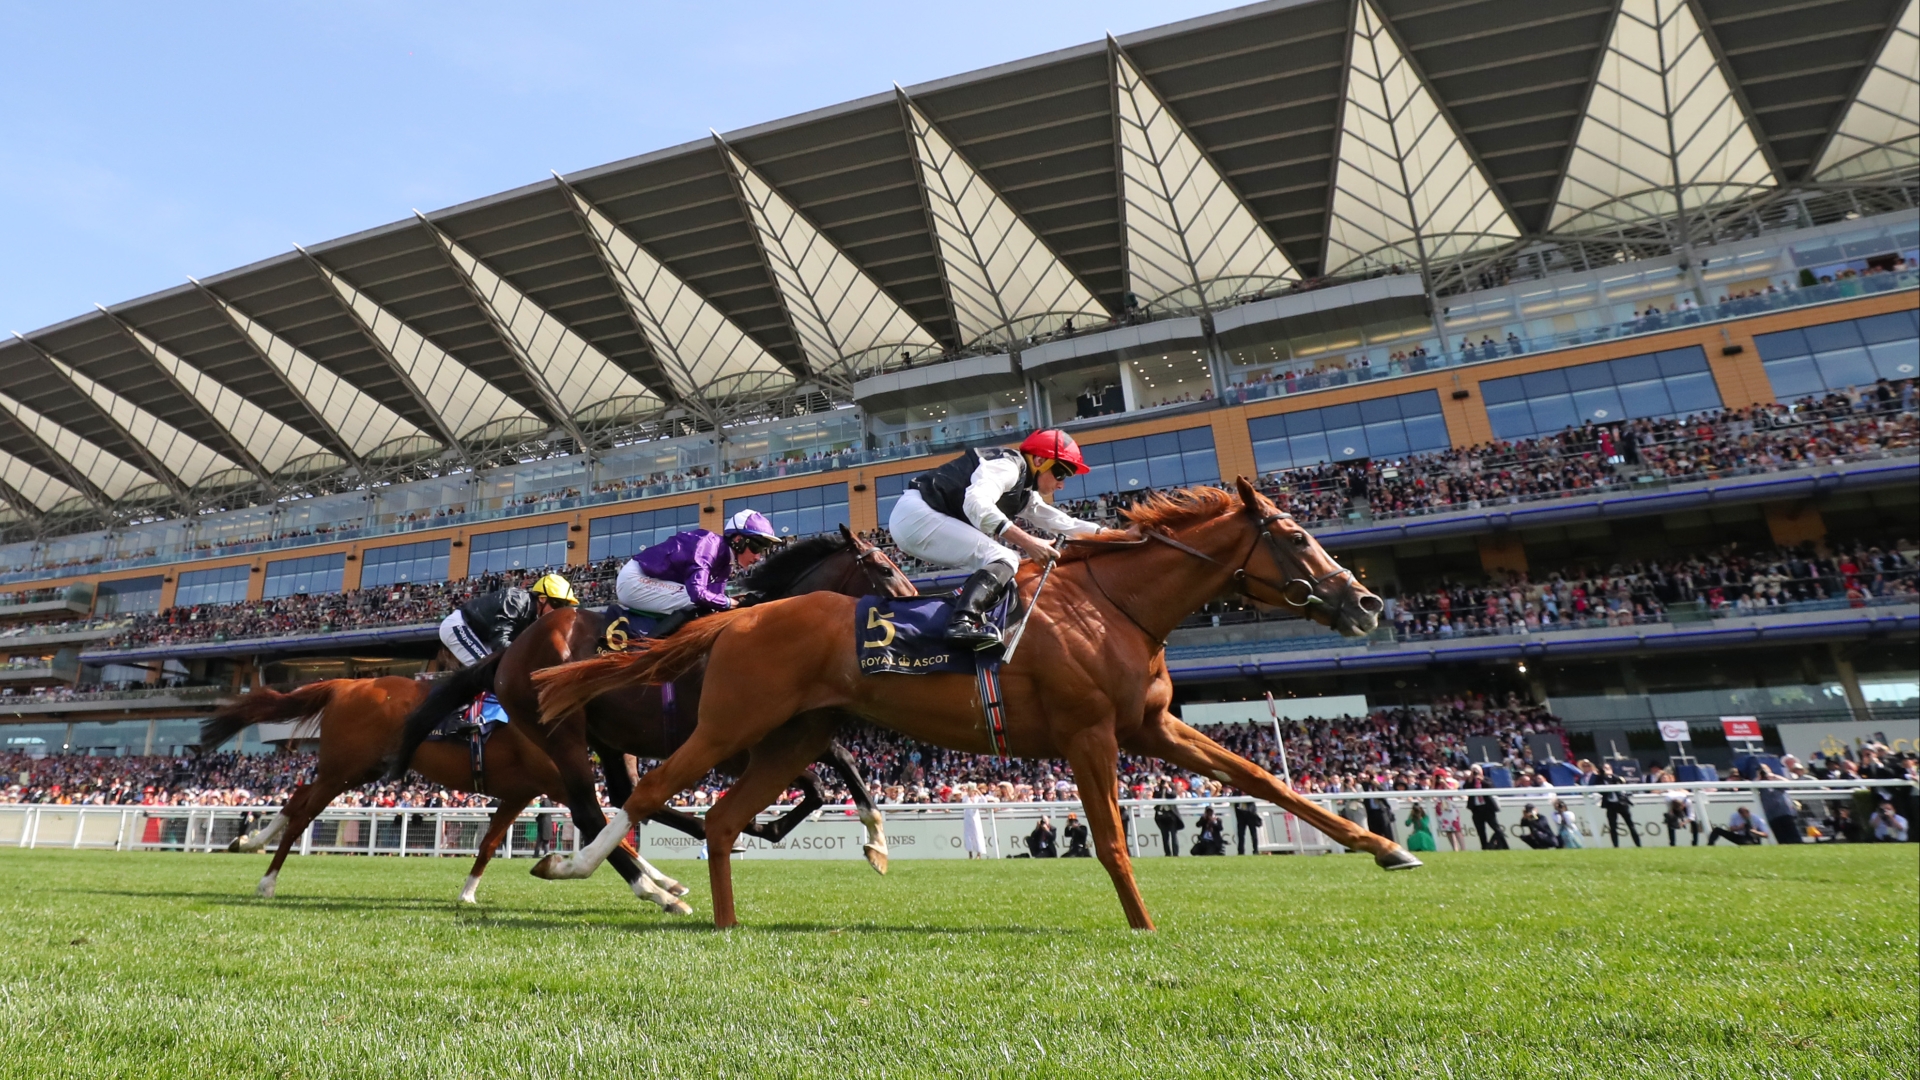 Ascot Gold Cup Live Stream Watch the Royal Ascot race online